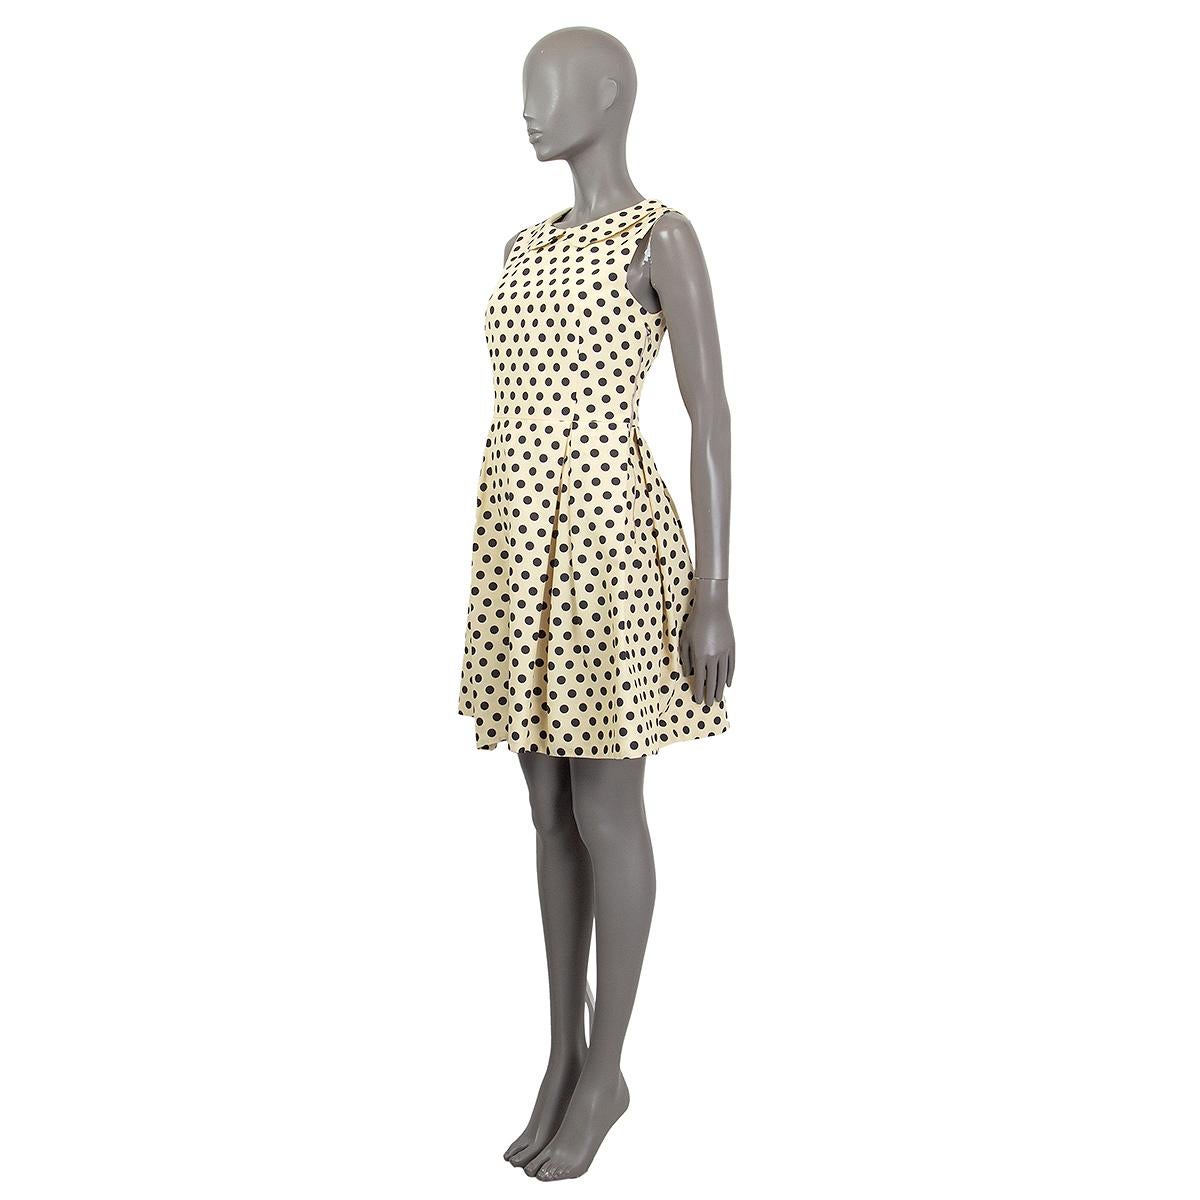 100% authentic Rochas sleeveless polka-dot dress in soft yellow grosgrain cotton (52%) and rayon (48%) with print in black and white. Has a peterpan collar and pleated skirt. Opens with a zipper on the side. Has been worn and is in excellent